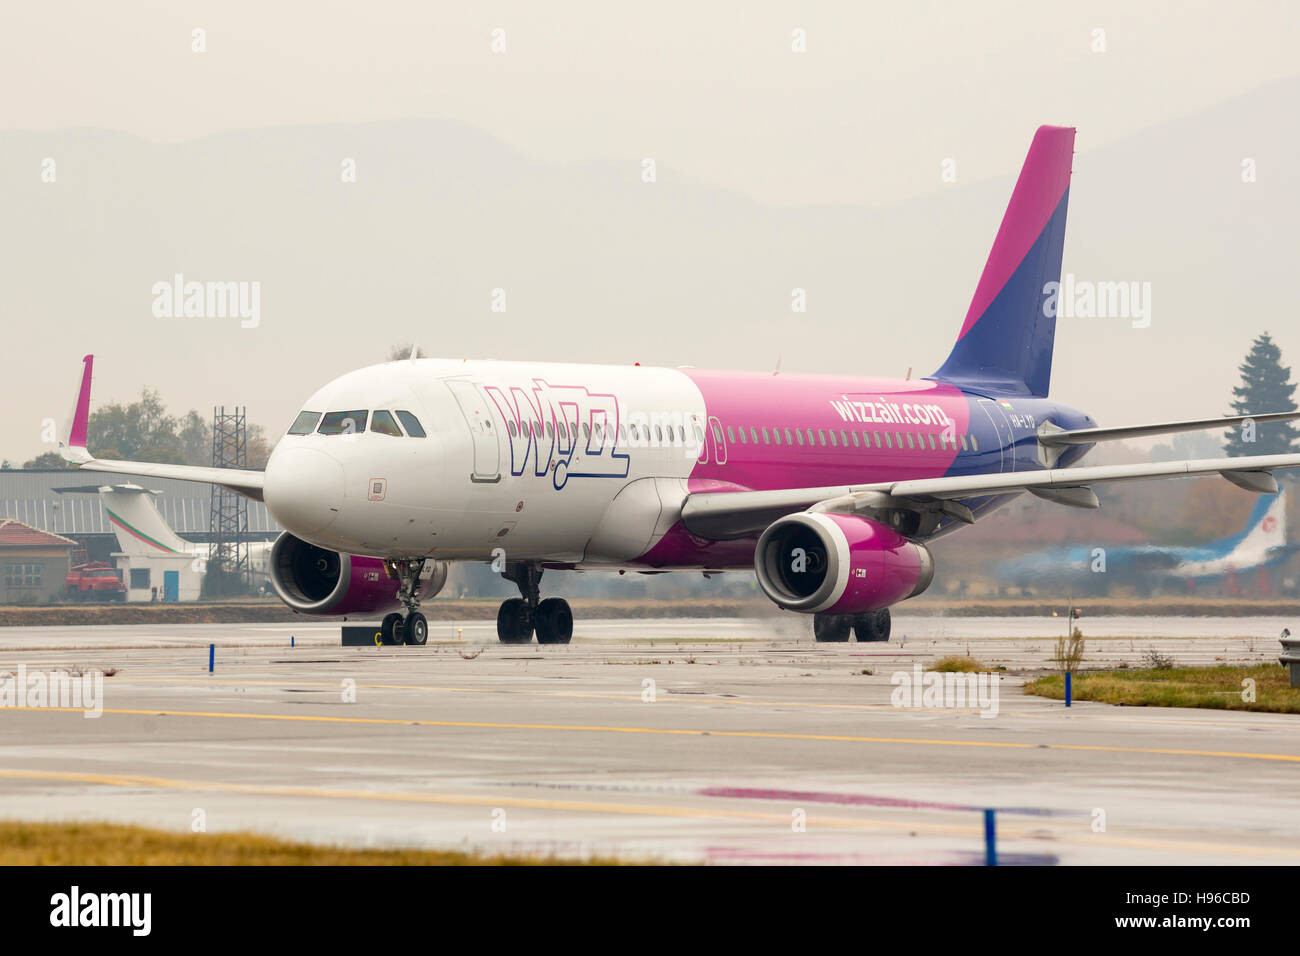 Sofia, Bulgaria - October 16, 2016: Wizz Air airplane on the runway after landing at the airport. Stock Photo